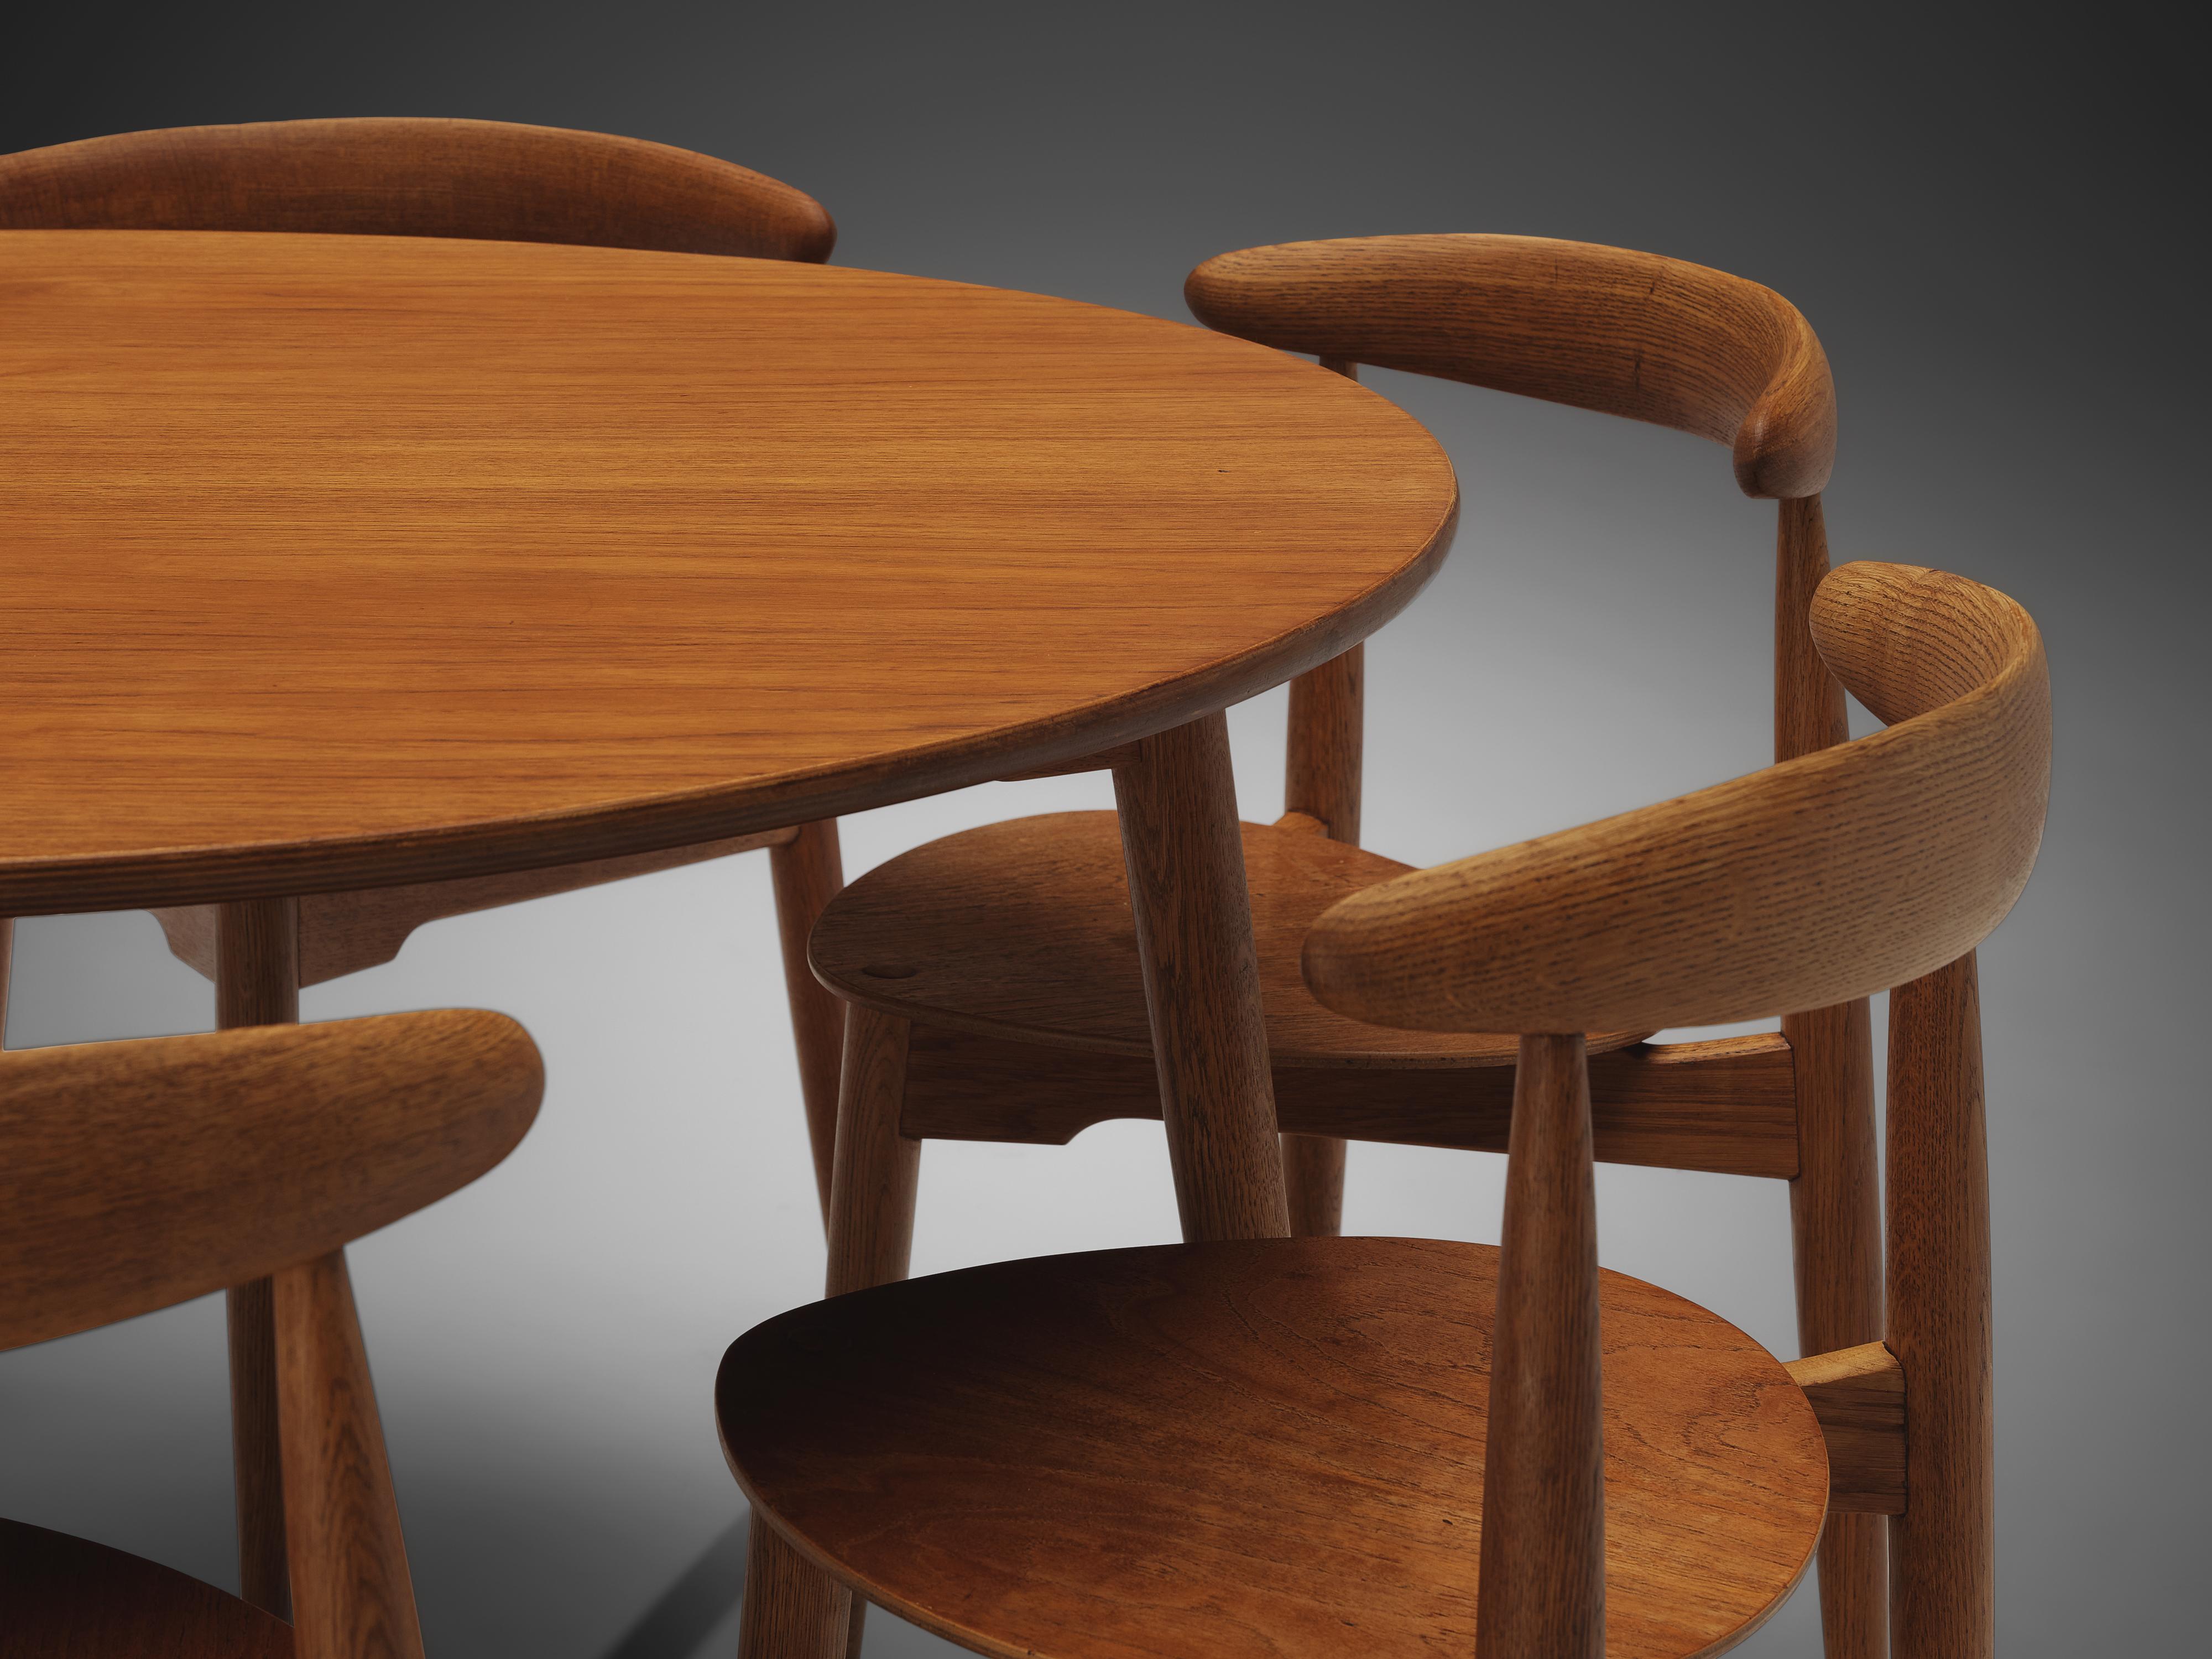 Mid-20th Century Hans J. Wegner for Fritz Hansen Set of 6 Chairs ‘FH4103’ with Round Dining Table